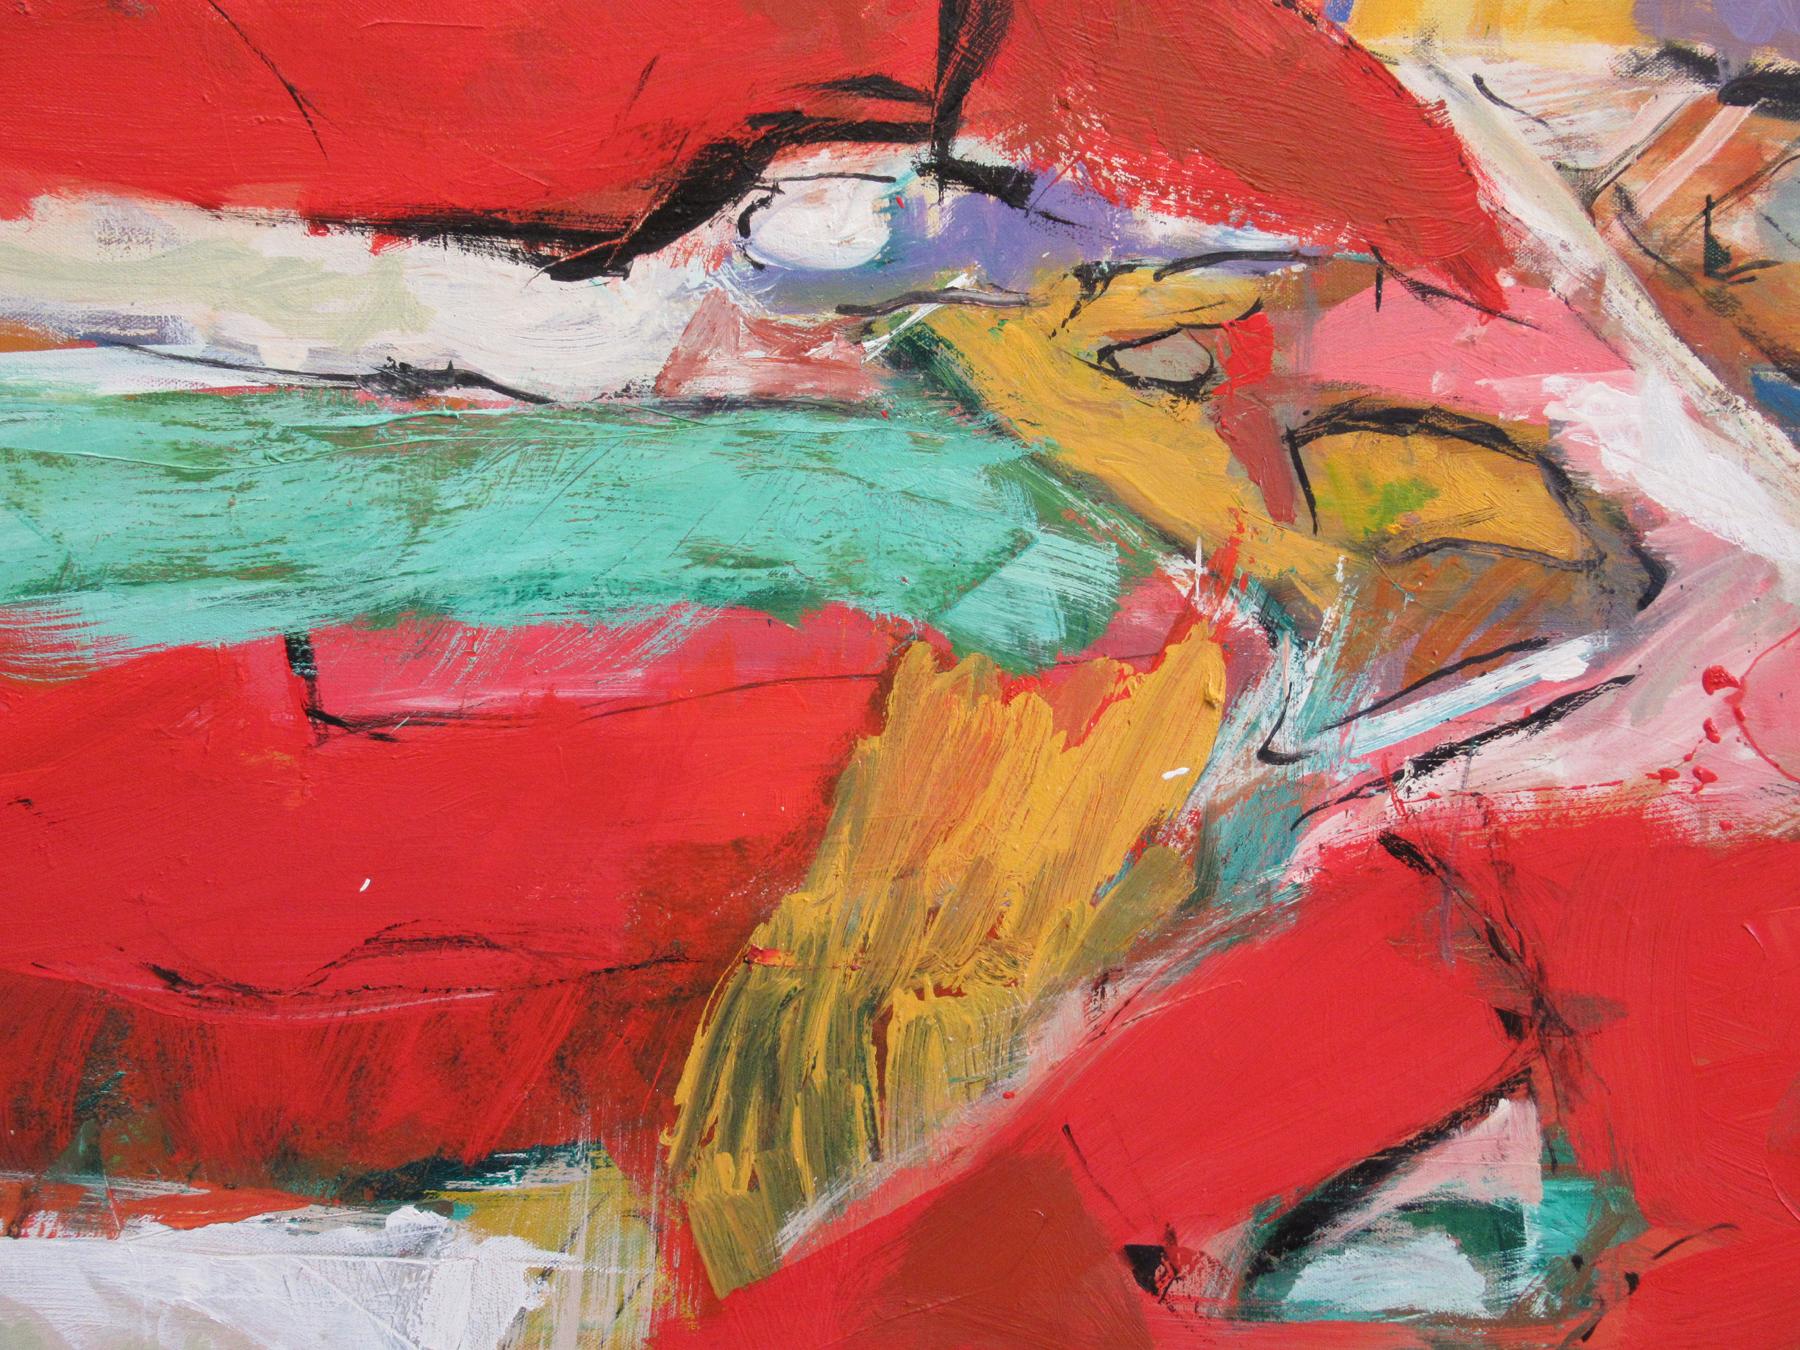 SONGBIRDS, Original Contemporary Red Abstract Expressionist Painting
36